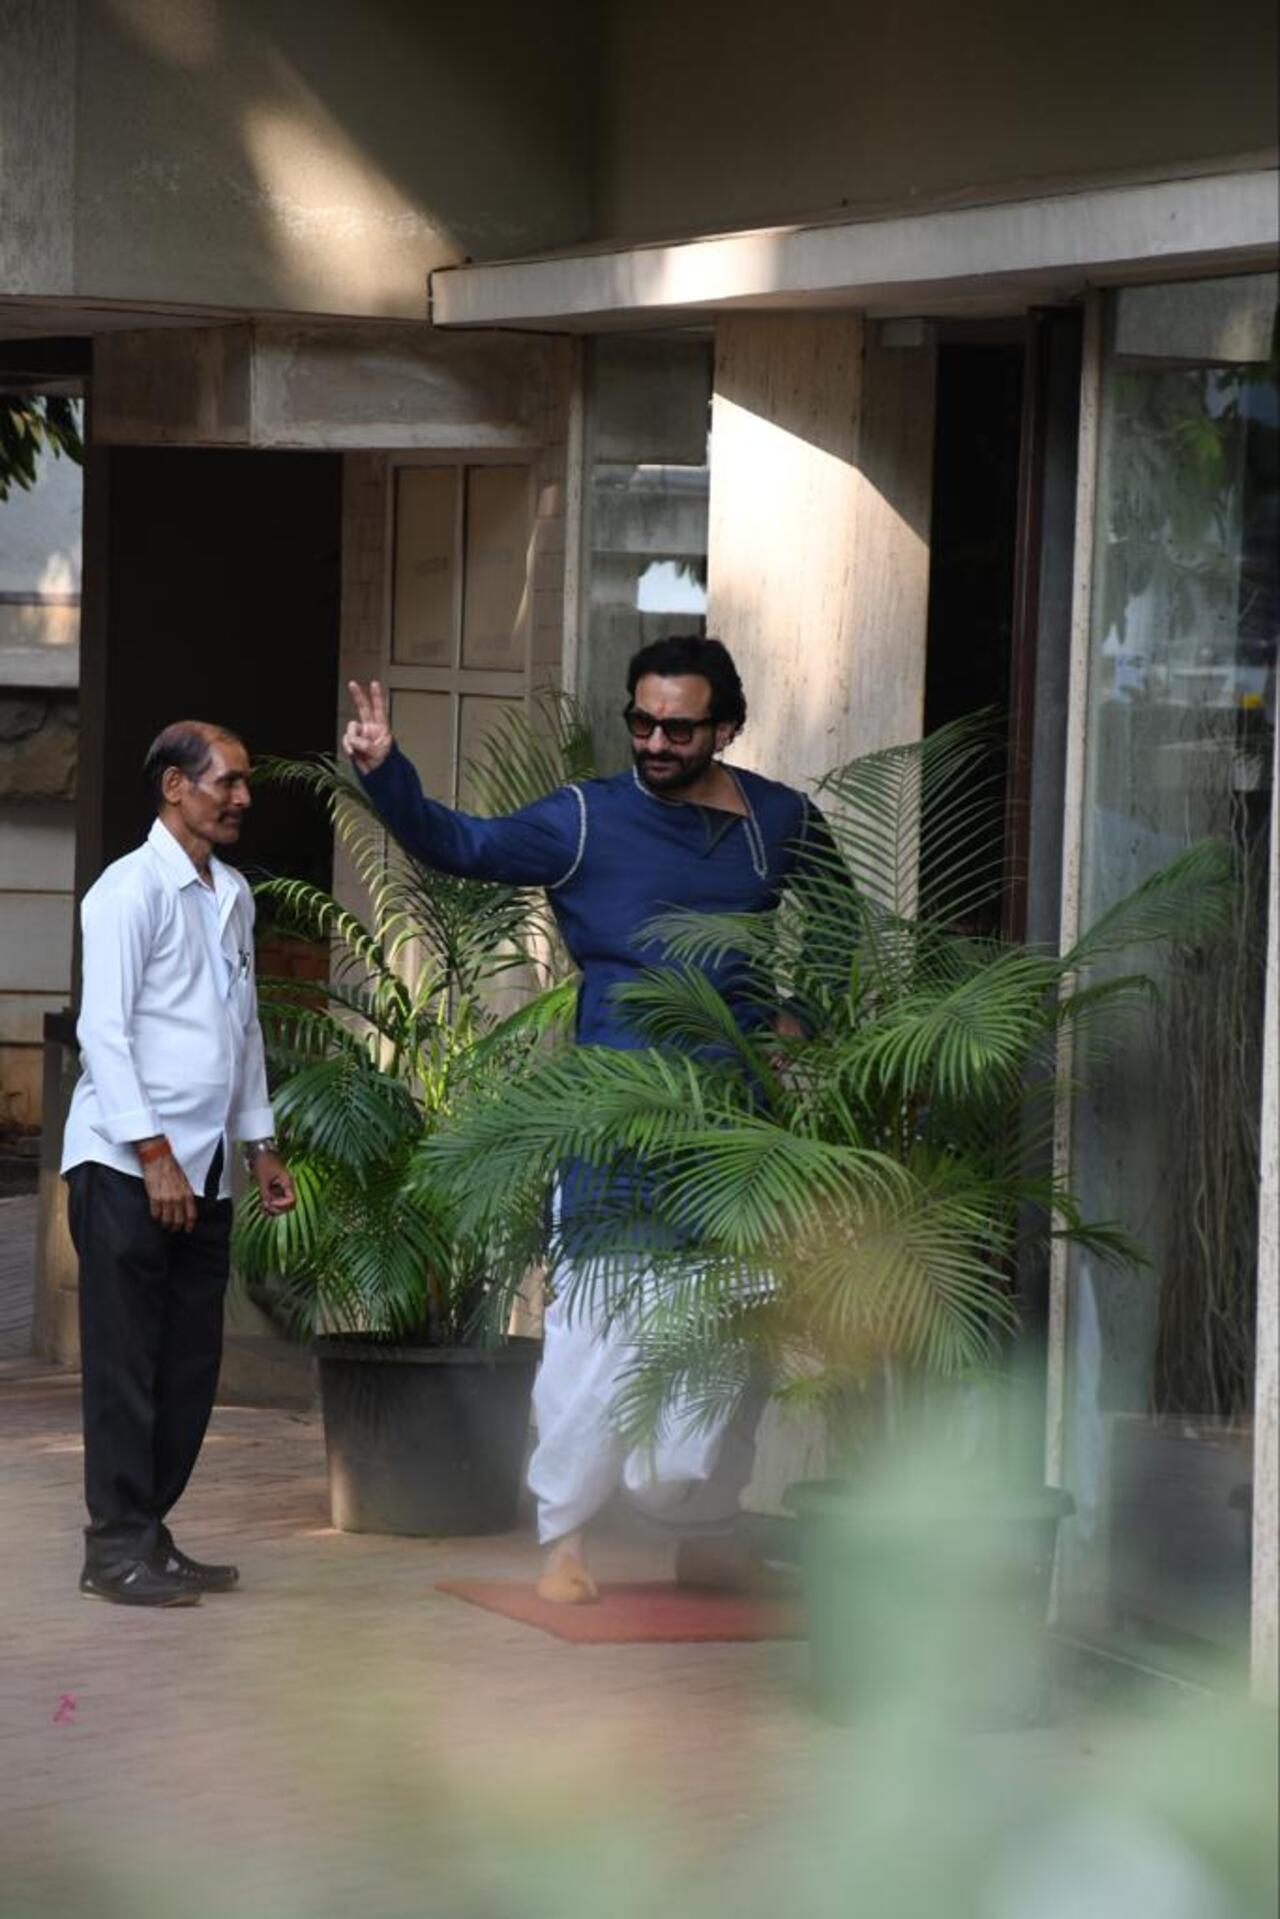 Saif Ali Khan waved at the paps and greeted them on Diwali before heading in